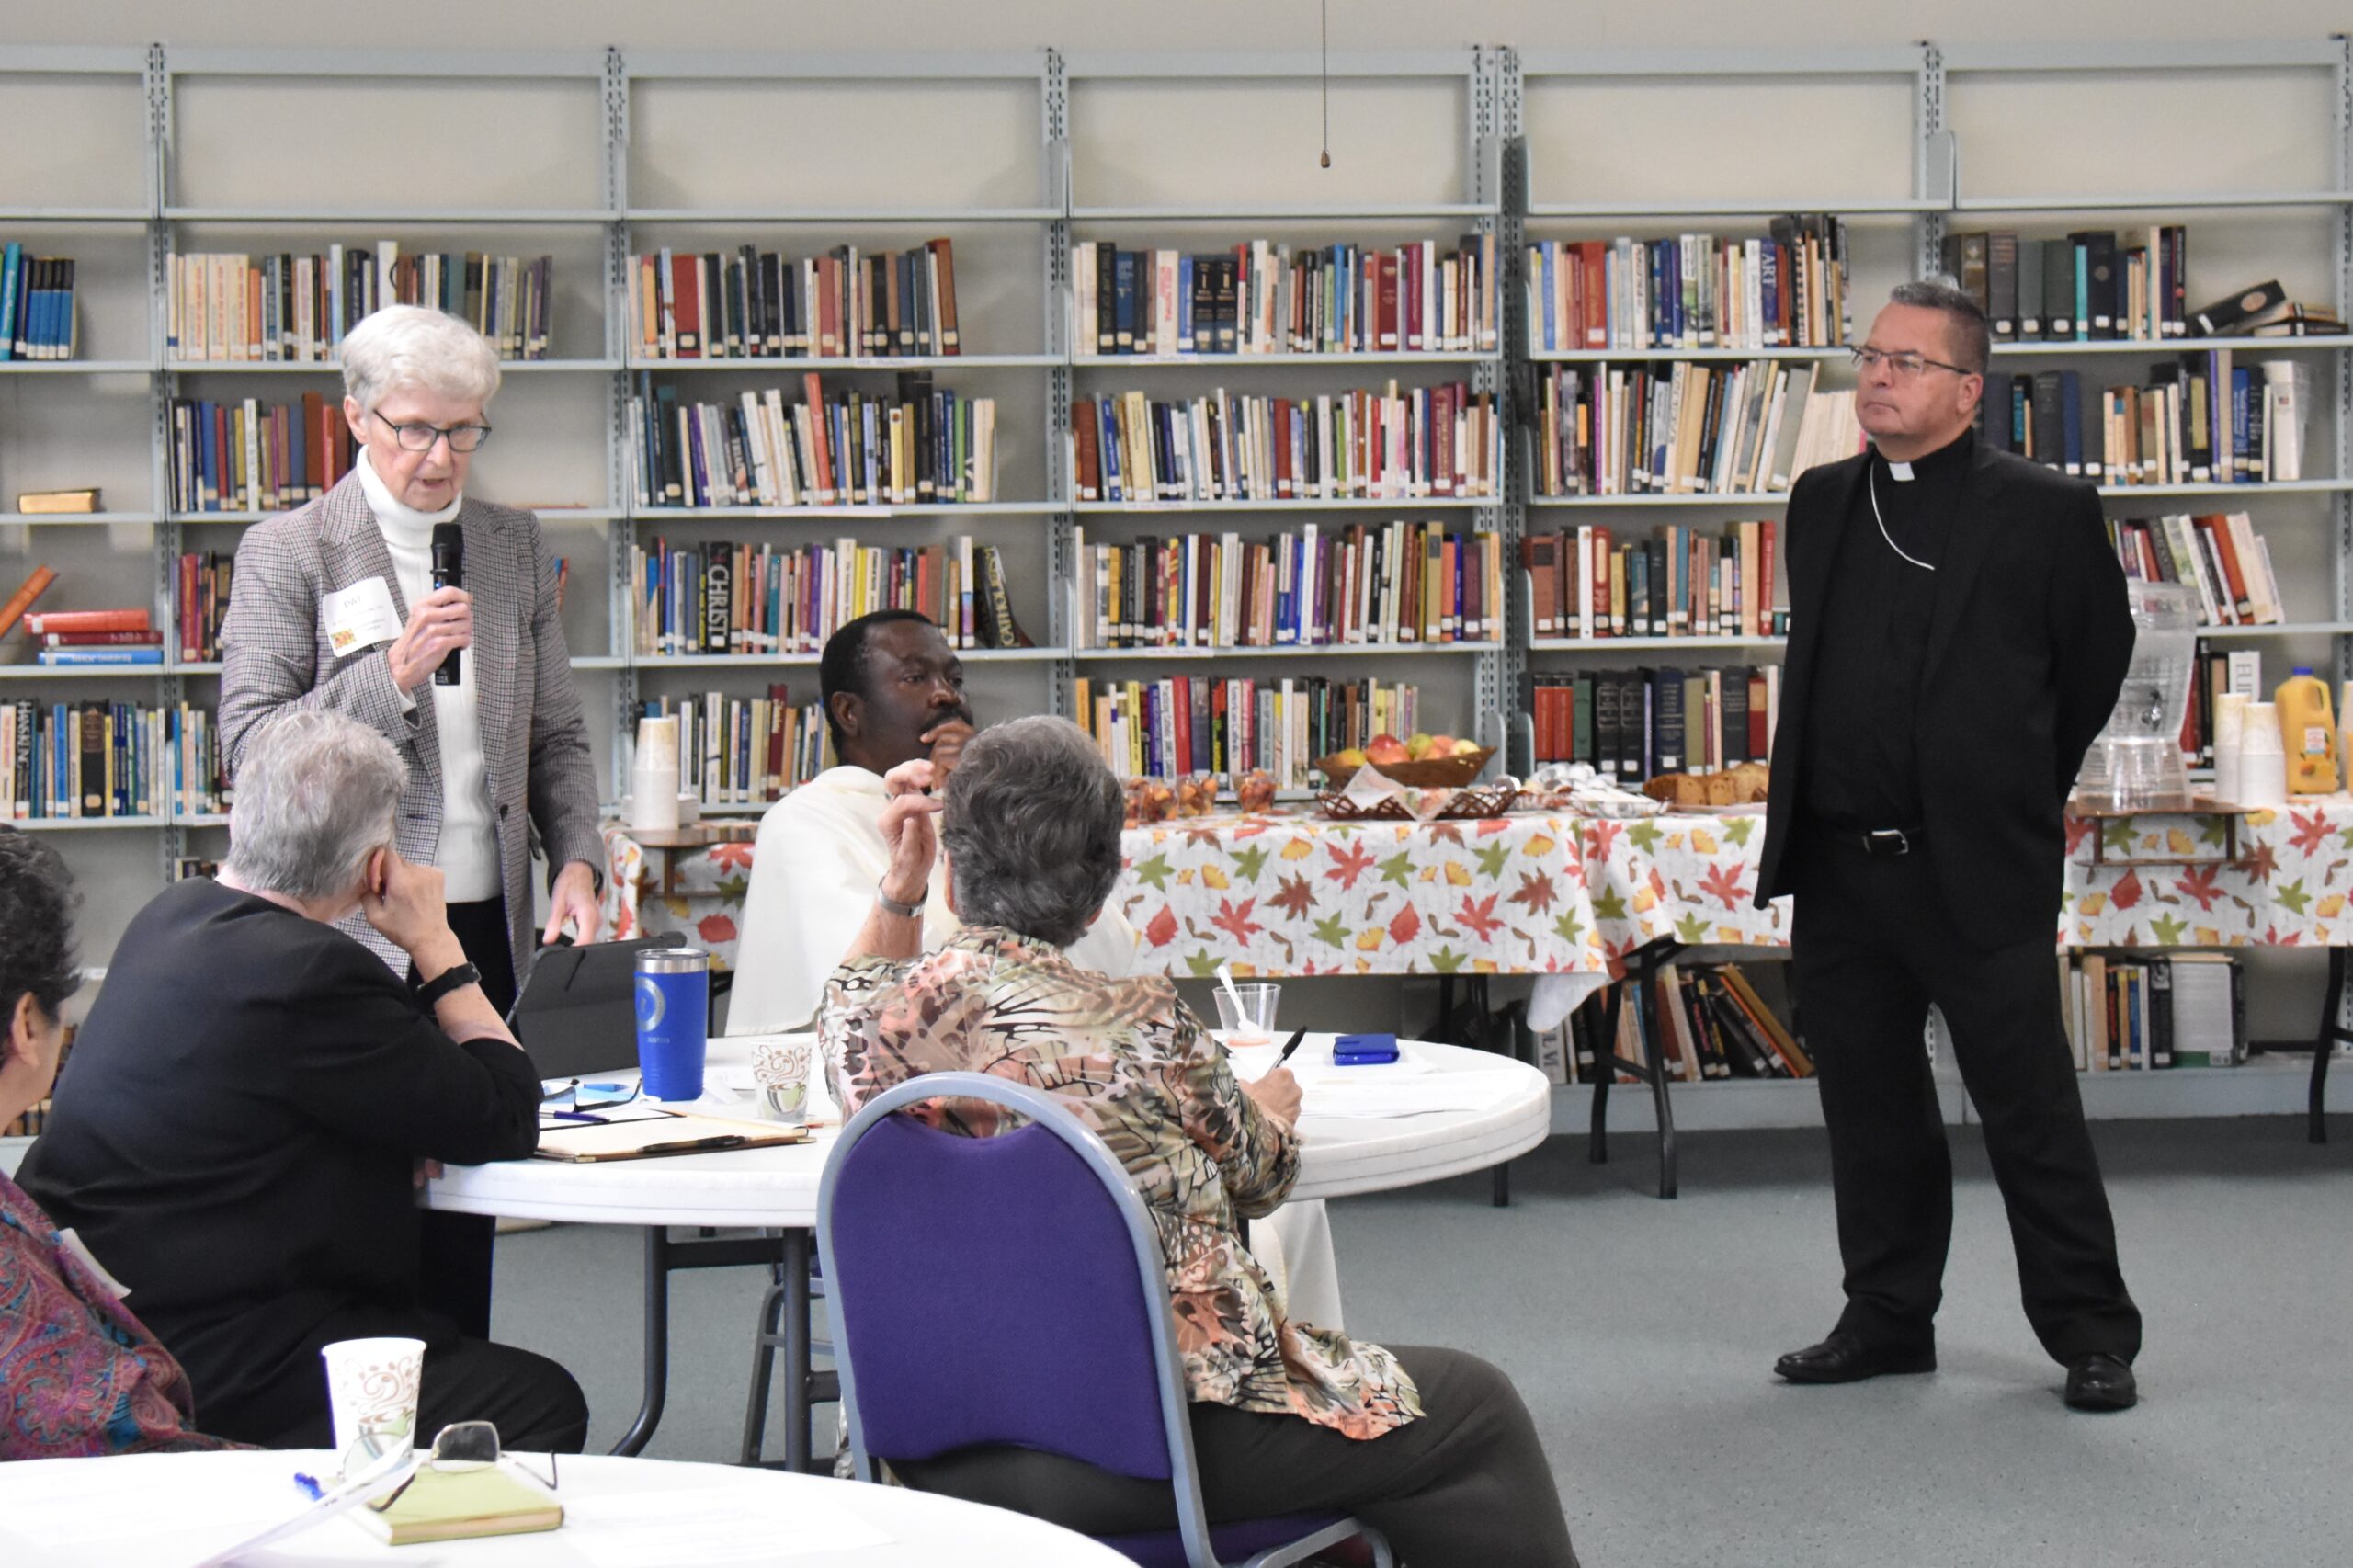 Bishop Bonnar dialogues with the leadership of religious communities in the Diocese of Youngstown